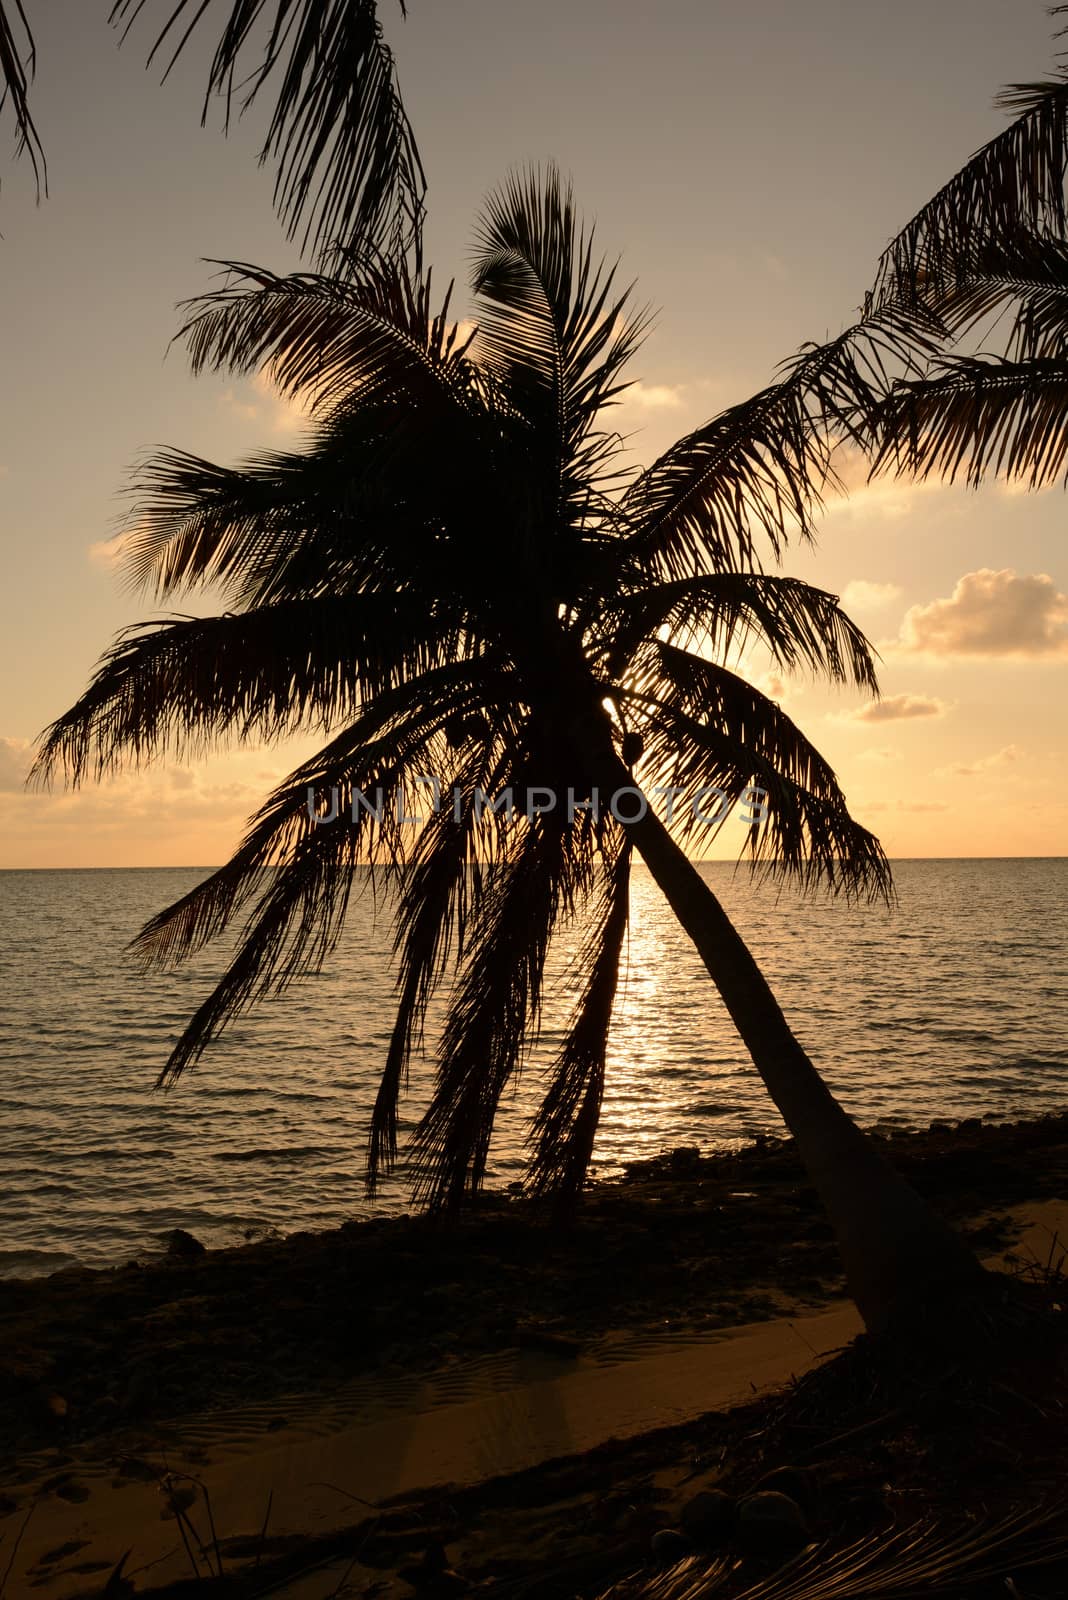 Palm tree silhouette and ocean in tropical location